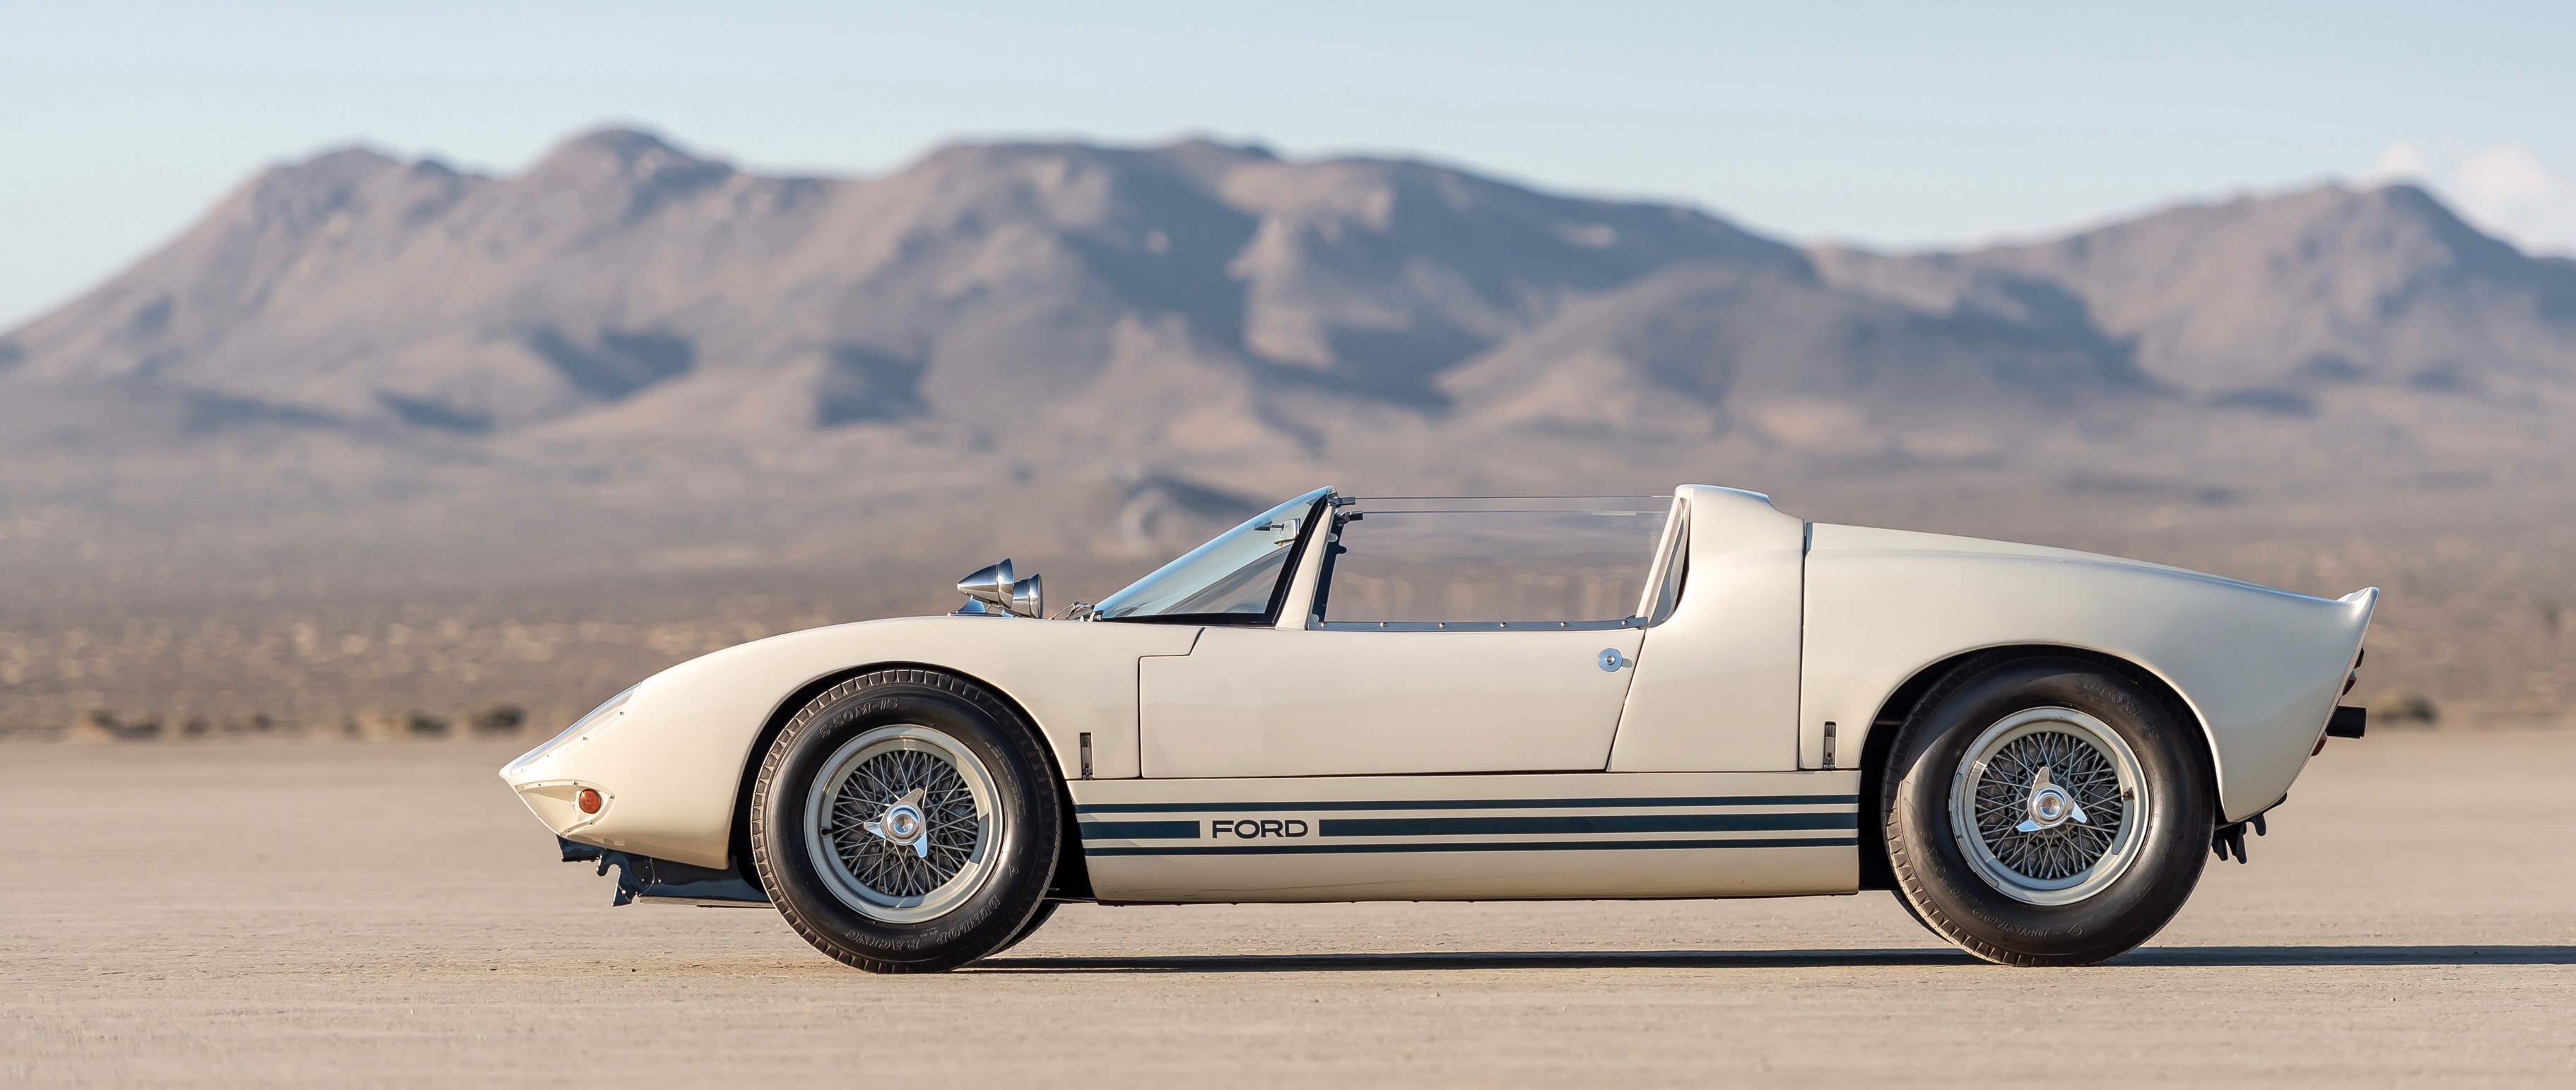 Ford GT, RM Sotheby’s offers ‘full Ford GT lineage’ at Monterey auction, ClassicCars.com Journal